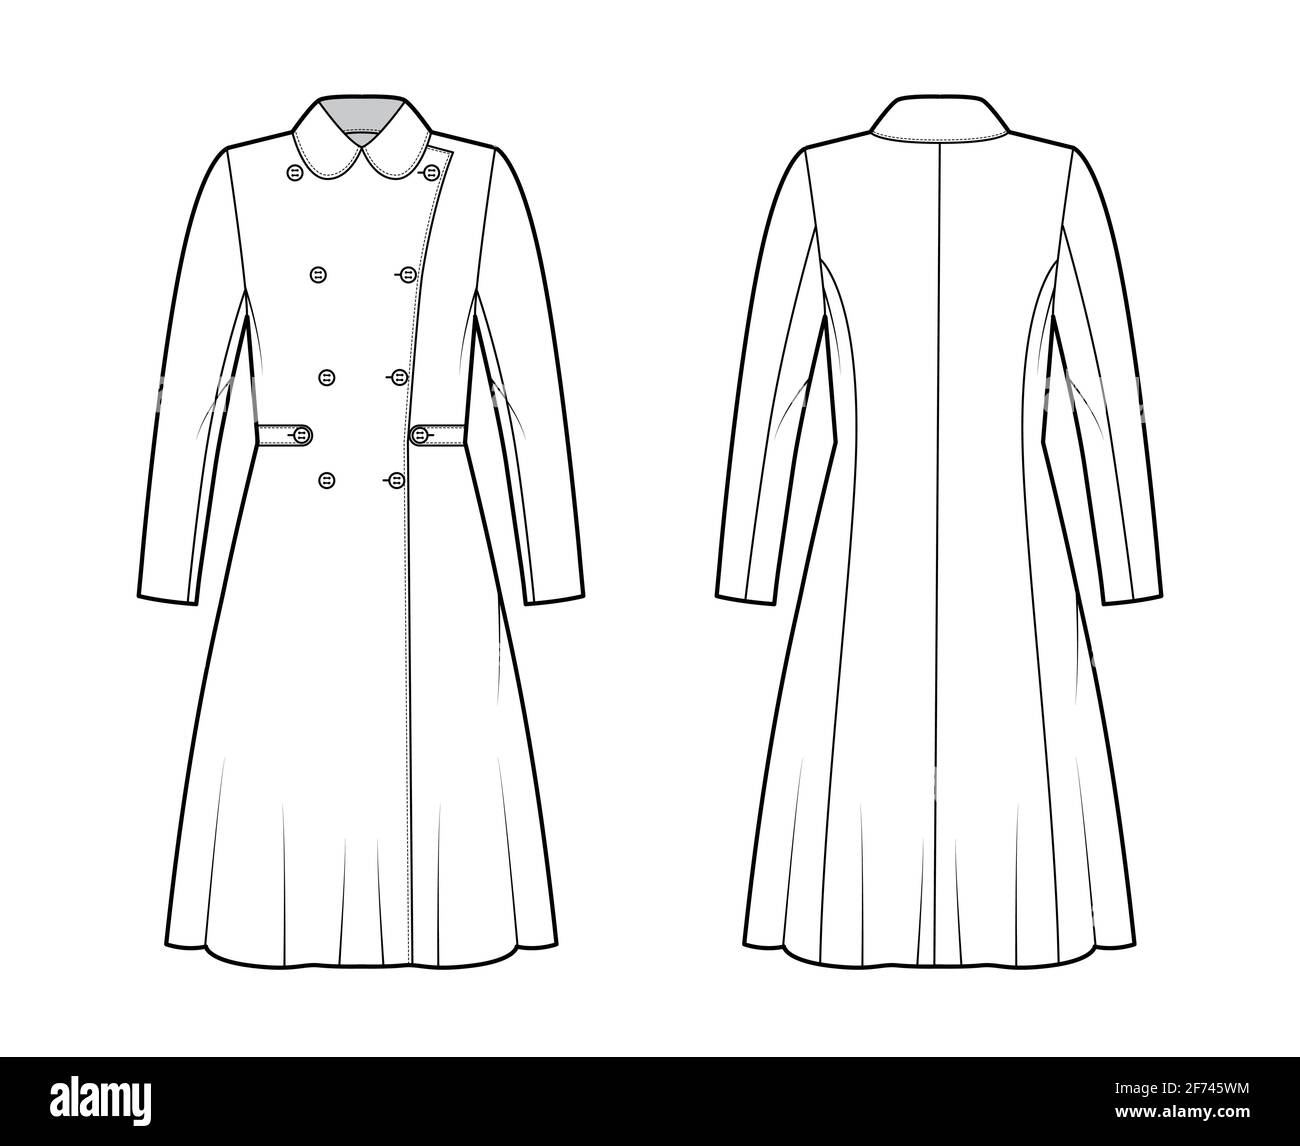 Skating coat technical fashion illustration with tabs, double breasted, round collar, knee length, A-line silhouette. Flat jacket template front, back, white color style. Women, men top CAD mockup Stock Vector